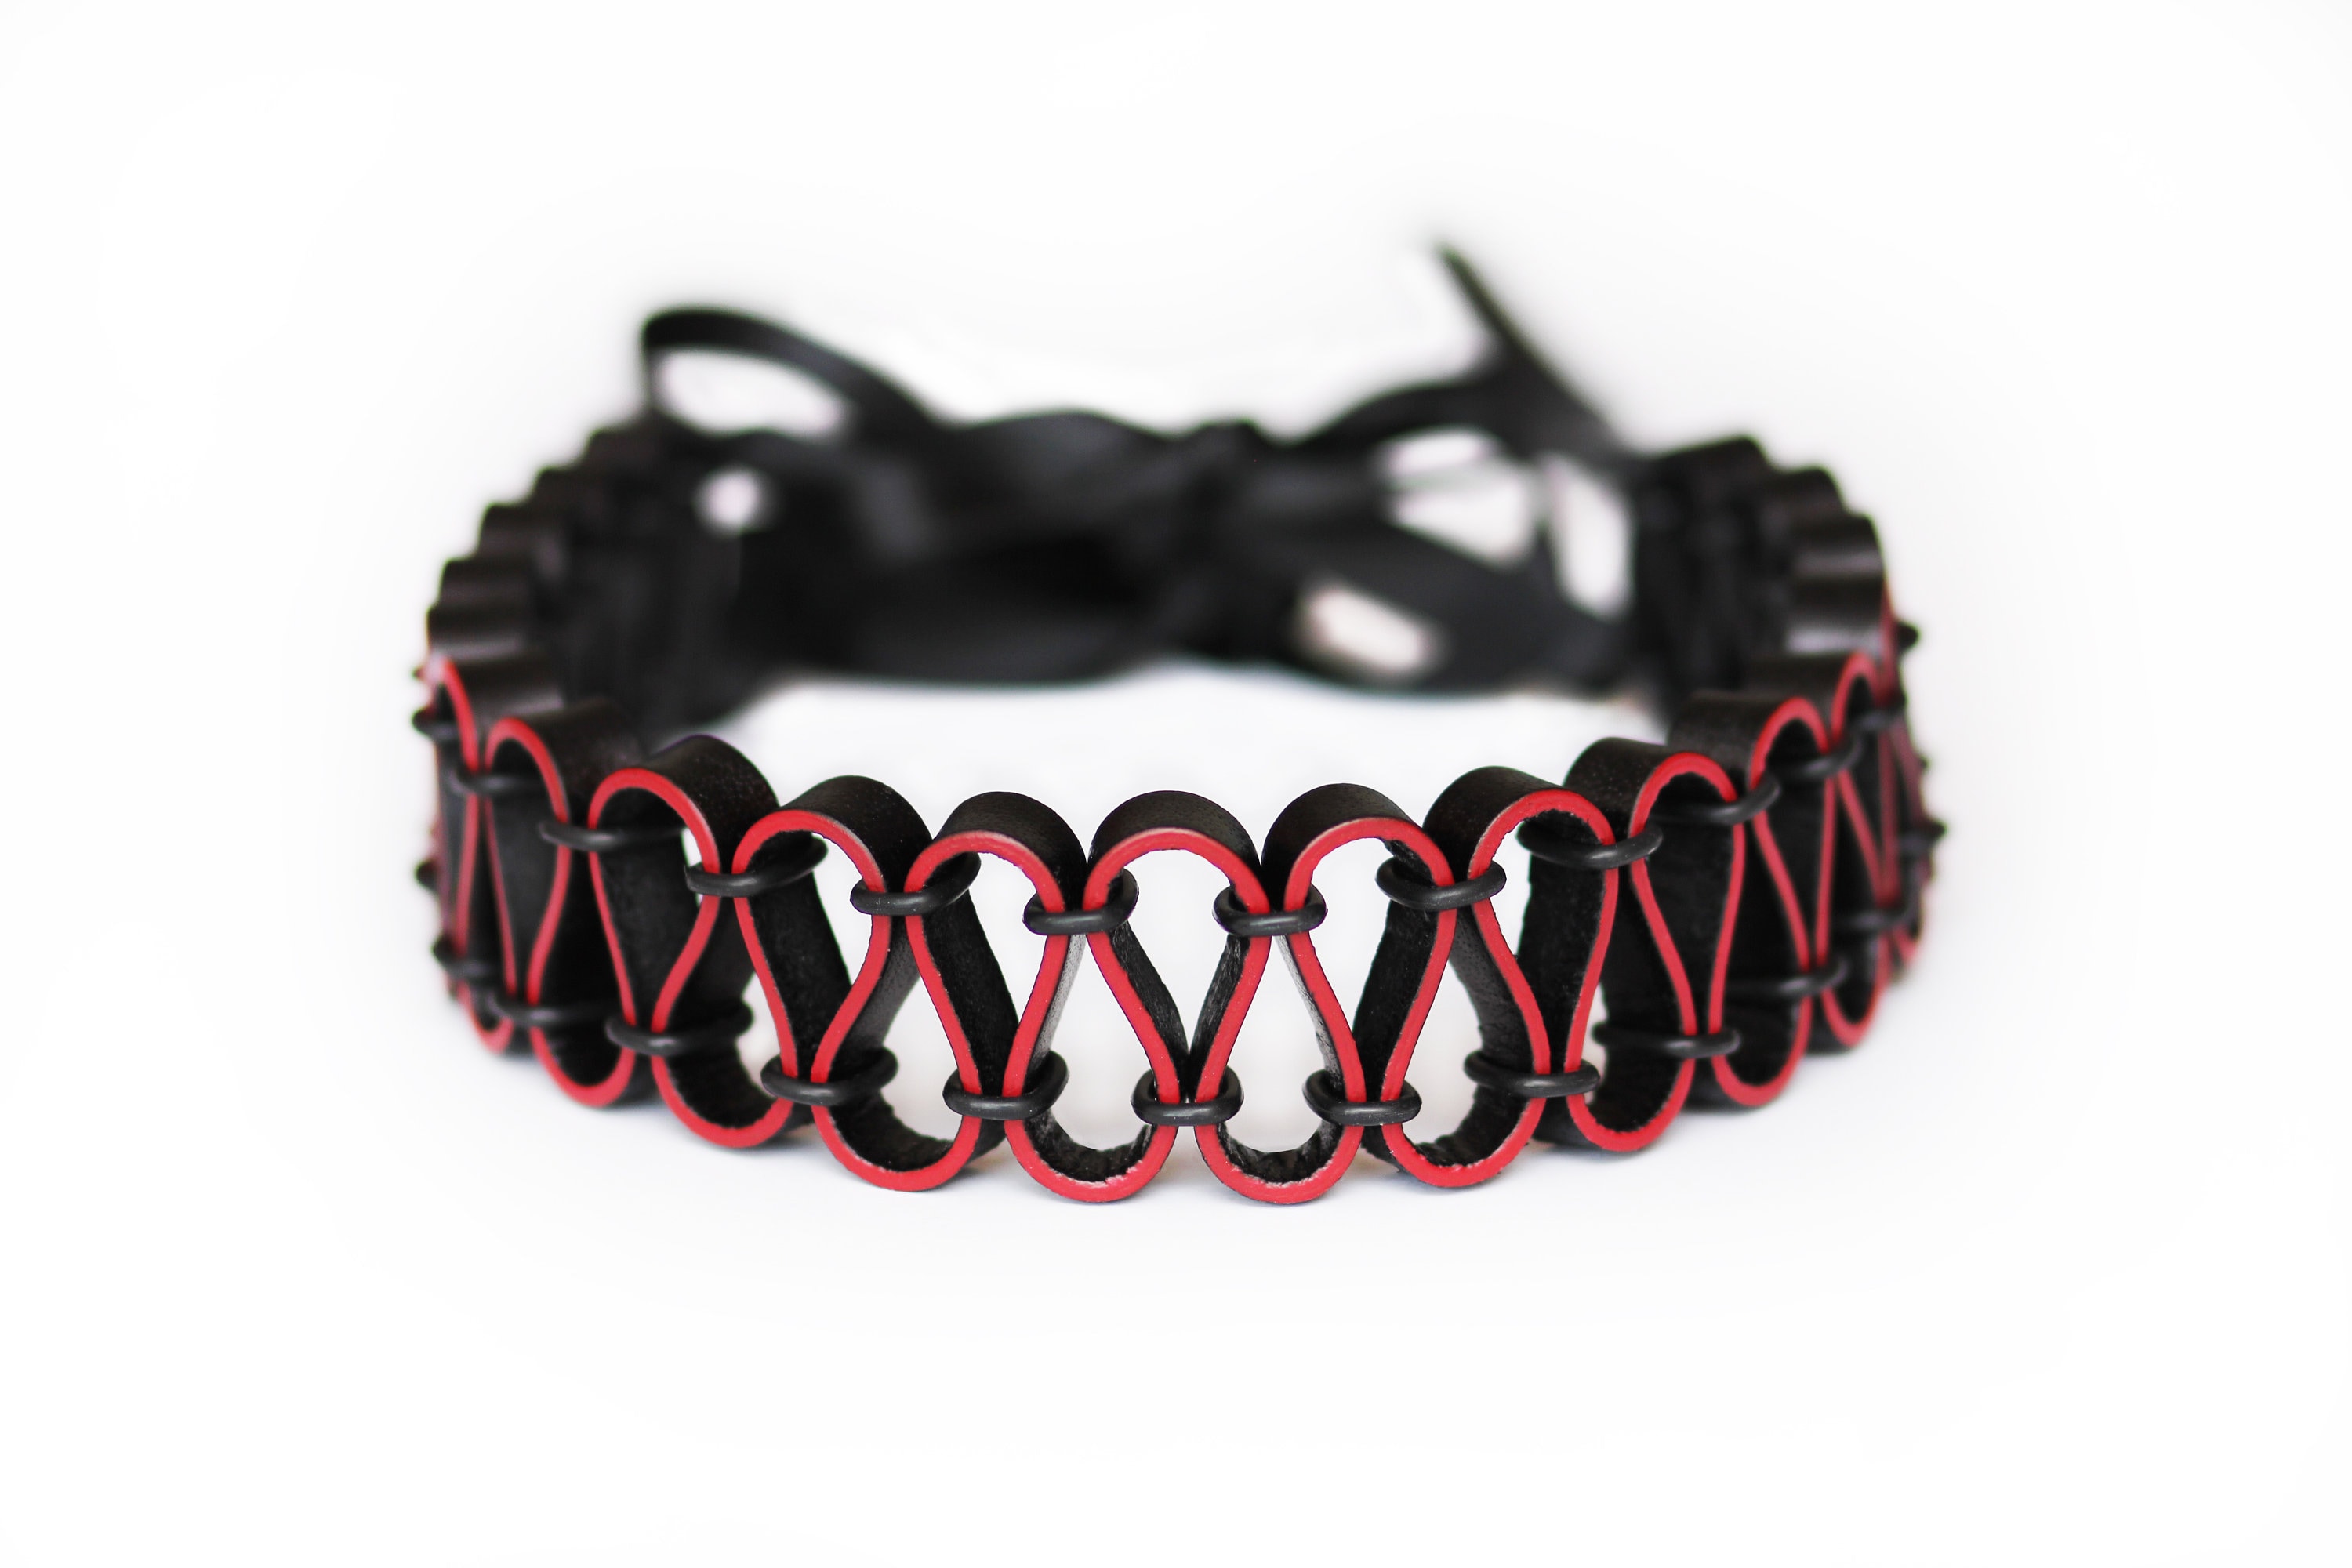 teater Skynd dig Beloved Black and Red Leather Ruffle Choker the Suicide Squad. Wavy - Etsy